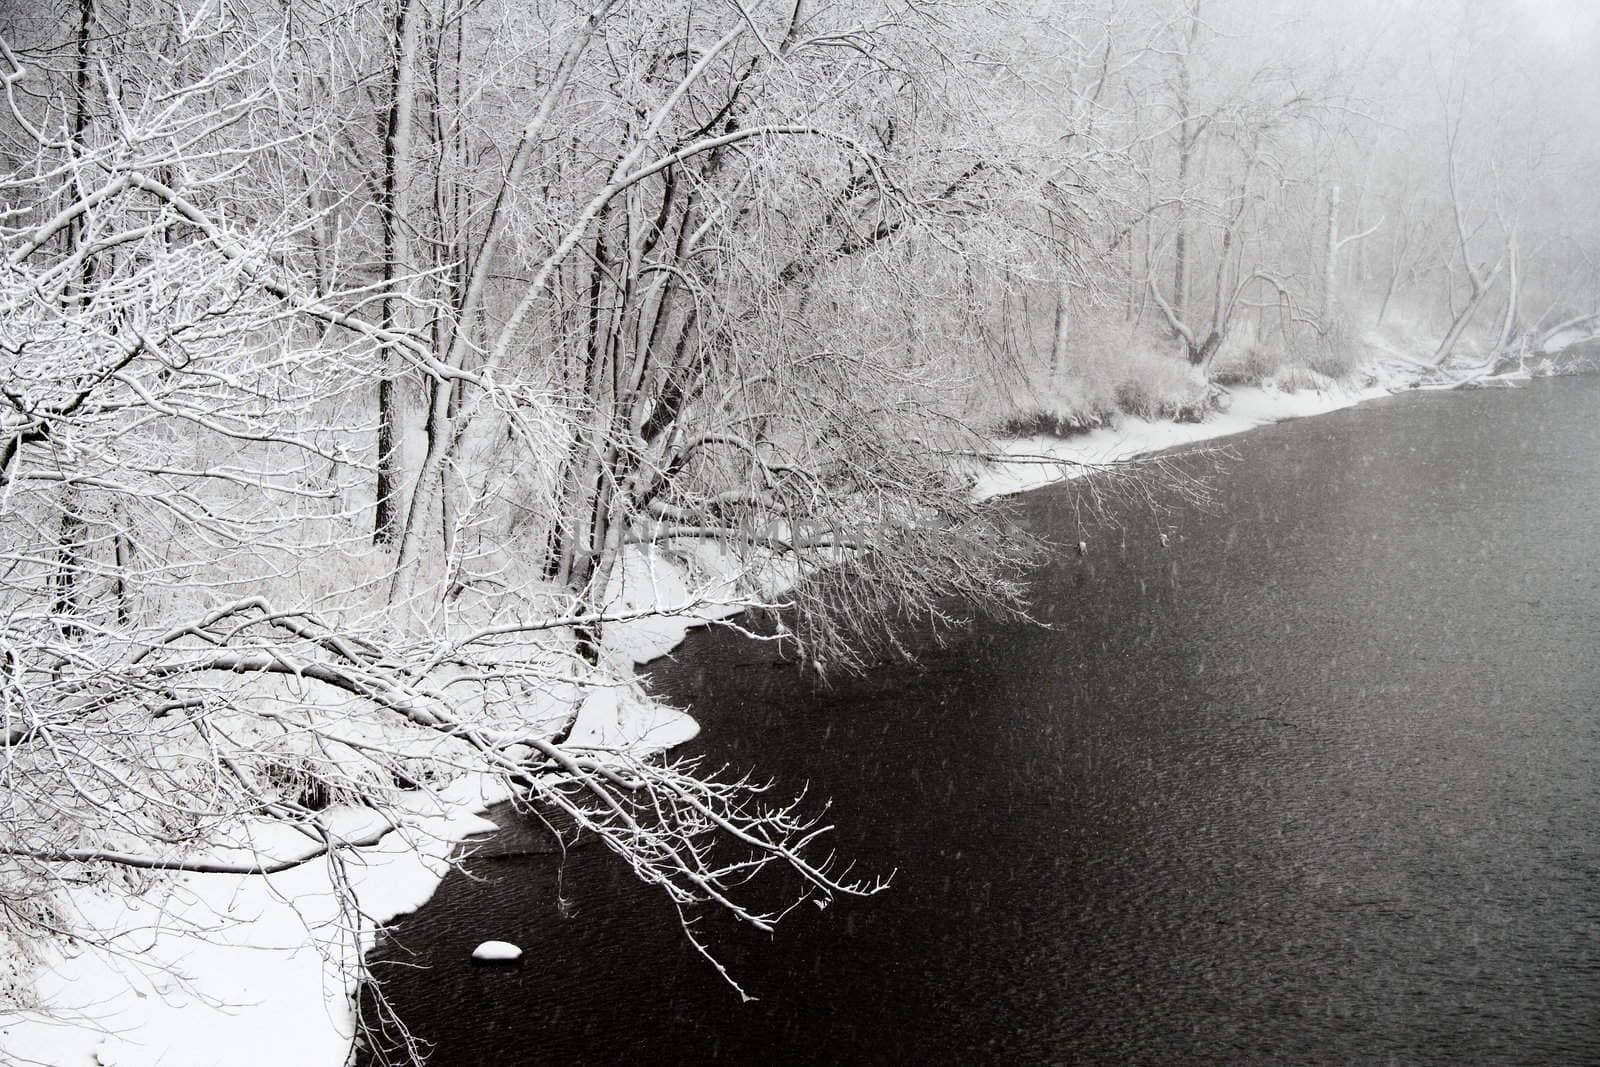 High contrast image of a river with snow covered trees on its banks.